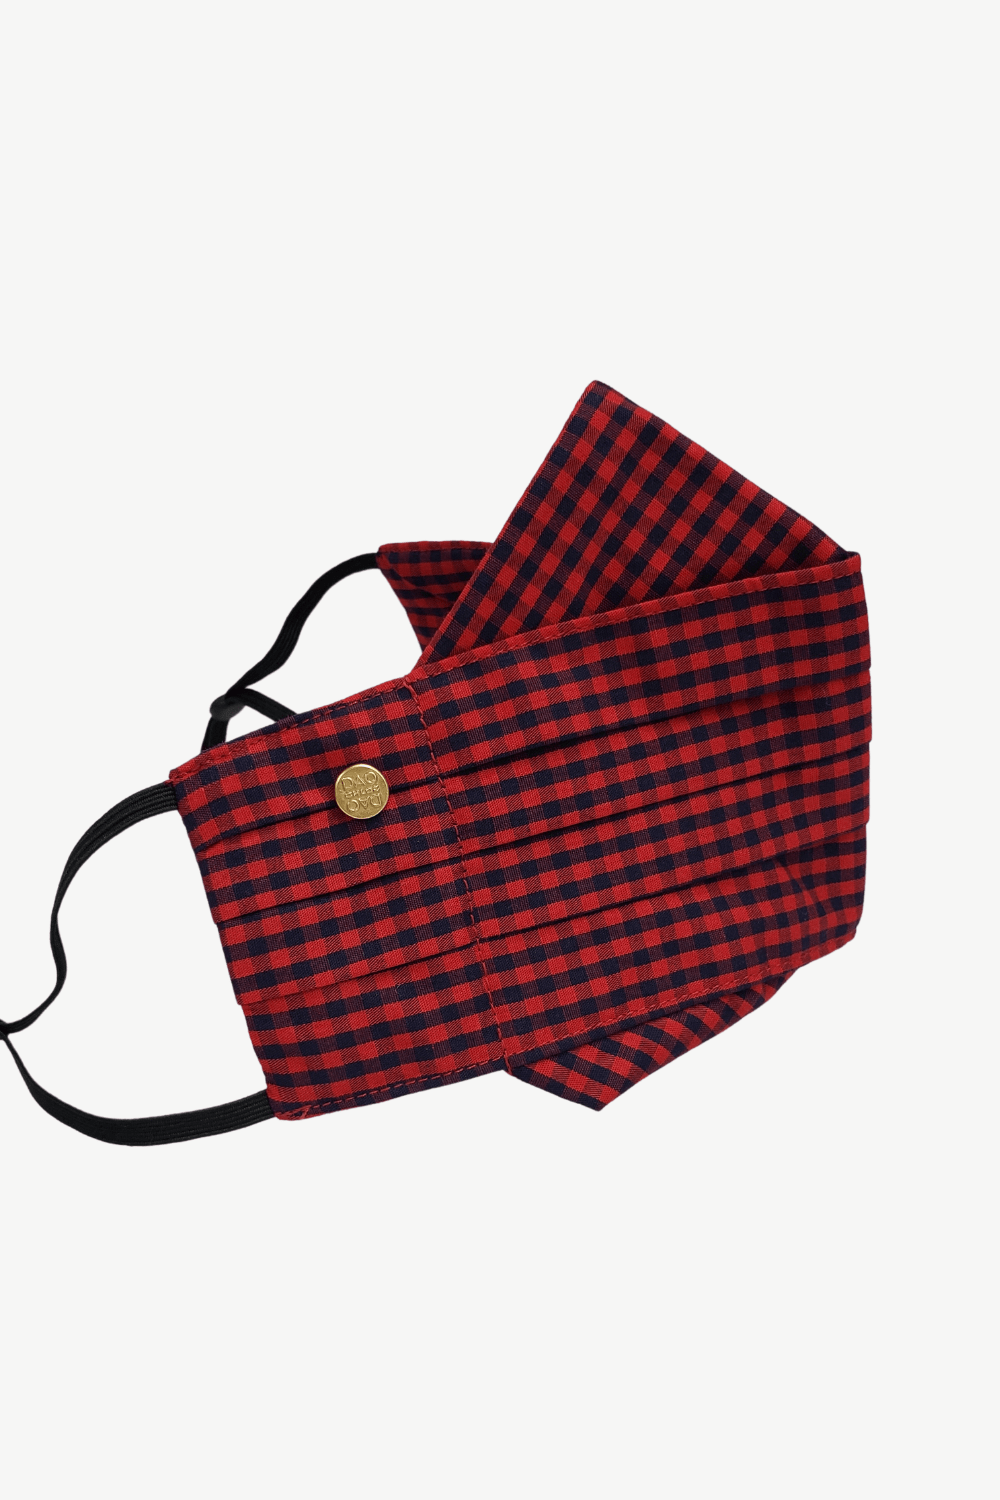 Safely Sip Face Masks Safely Sip Mask in Red and Black Gingham - Chloe Dao